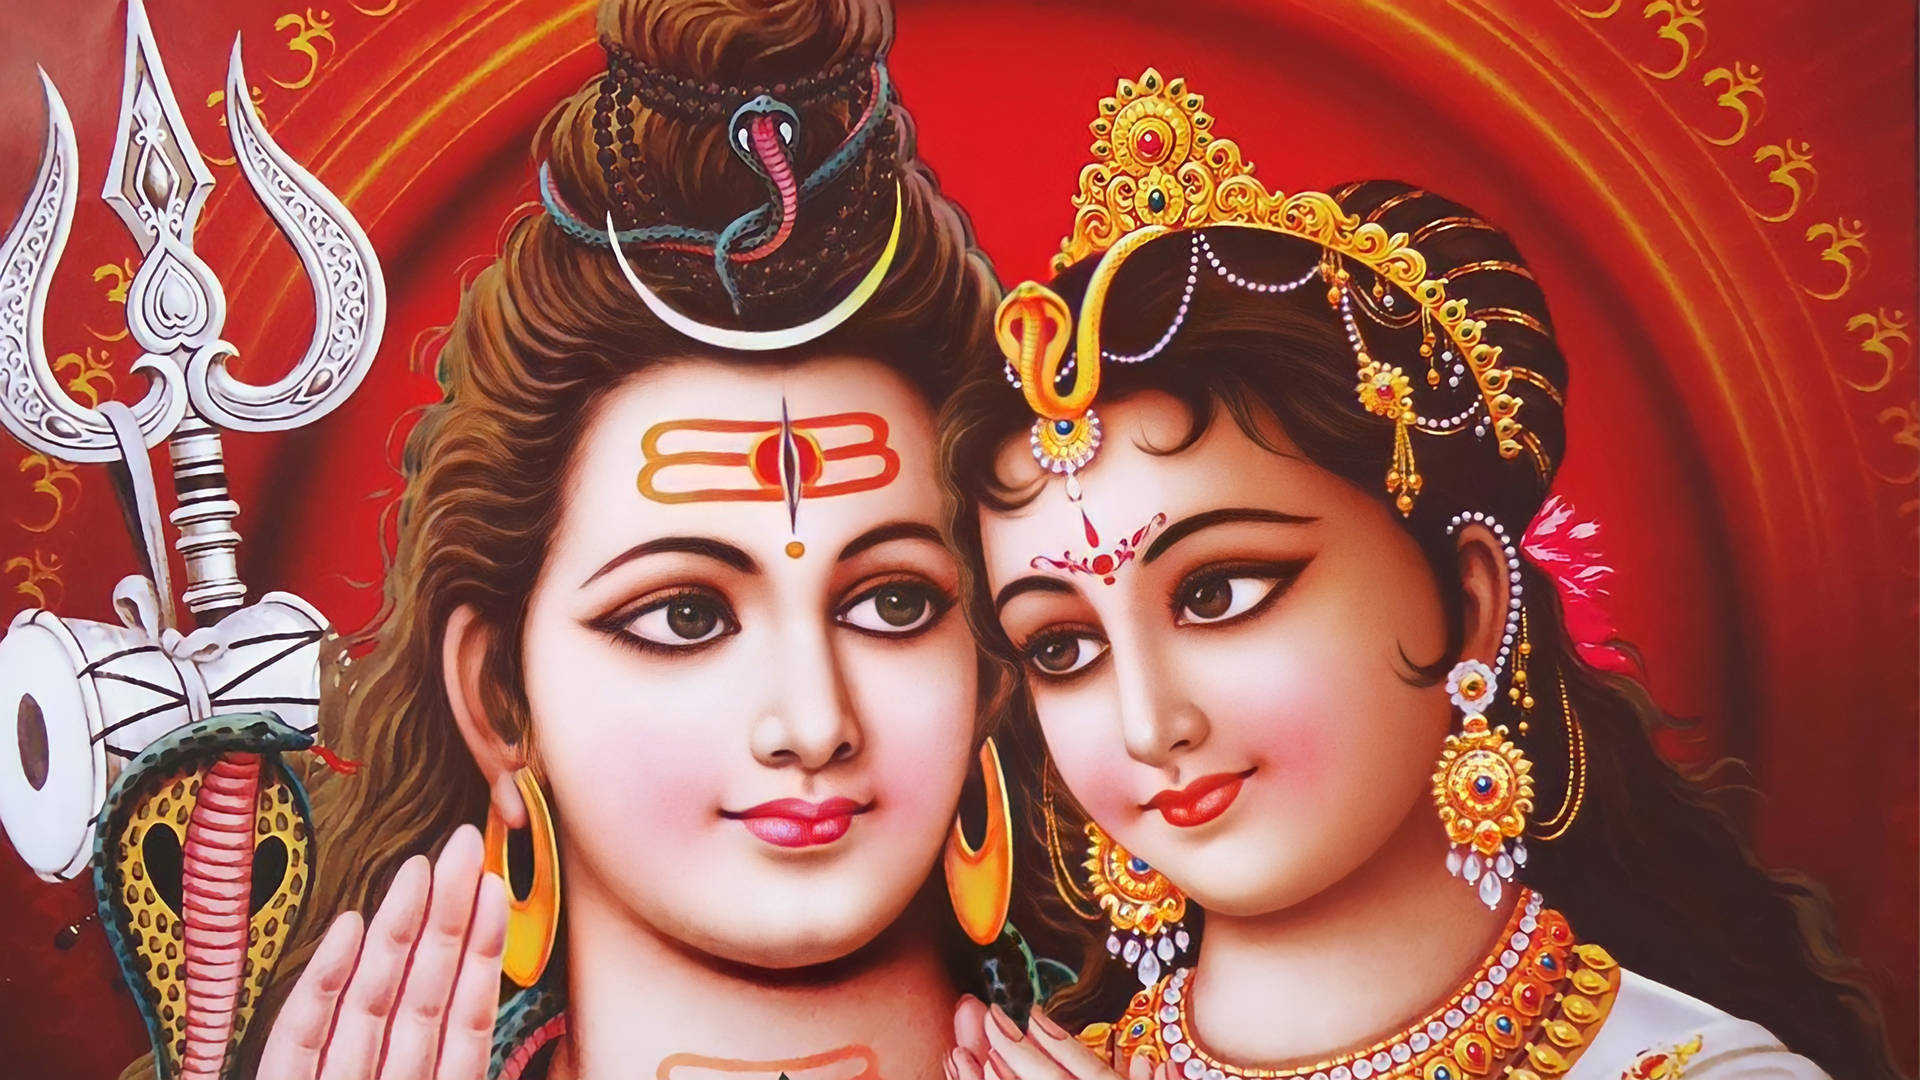 Divine Embrace - A High-definition Snapshot Of Shiv And Parvati